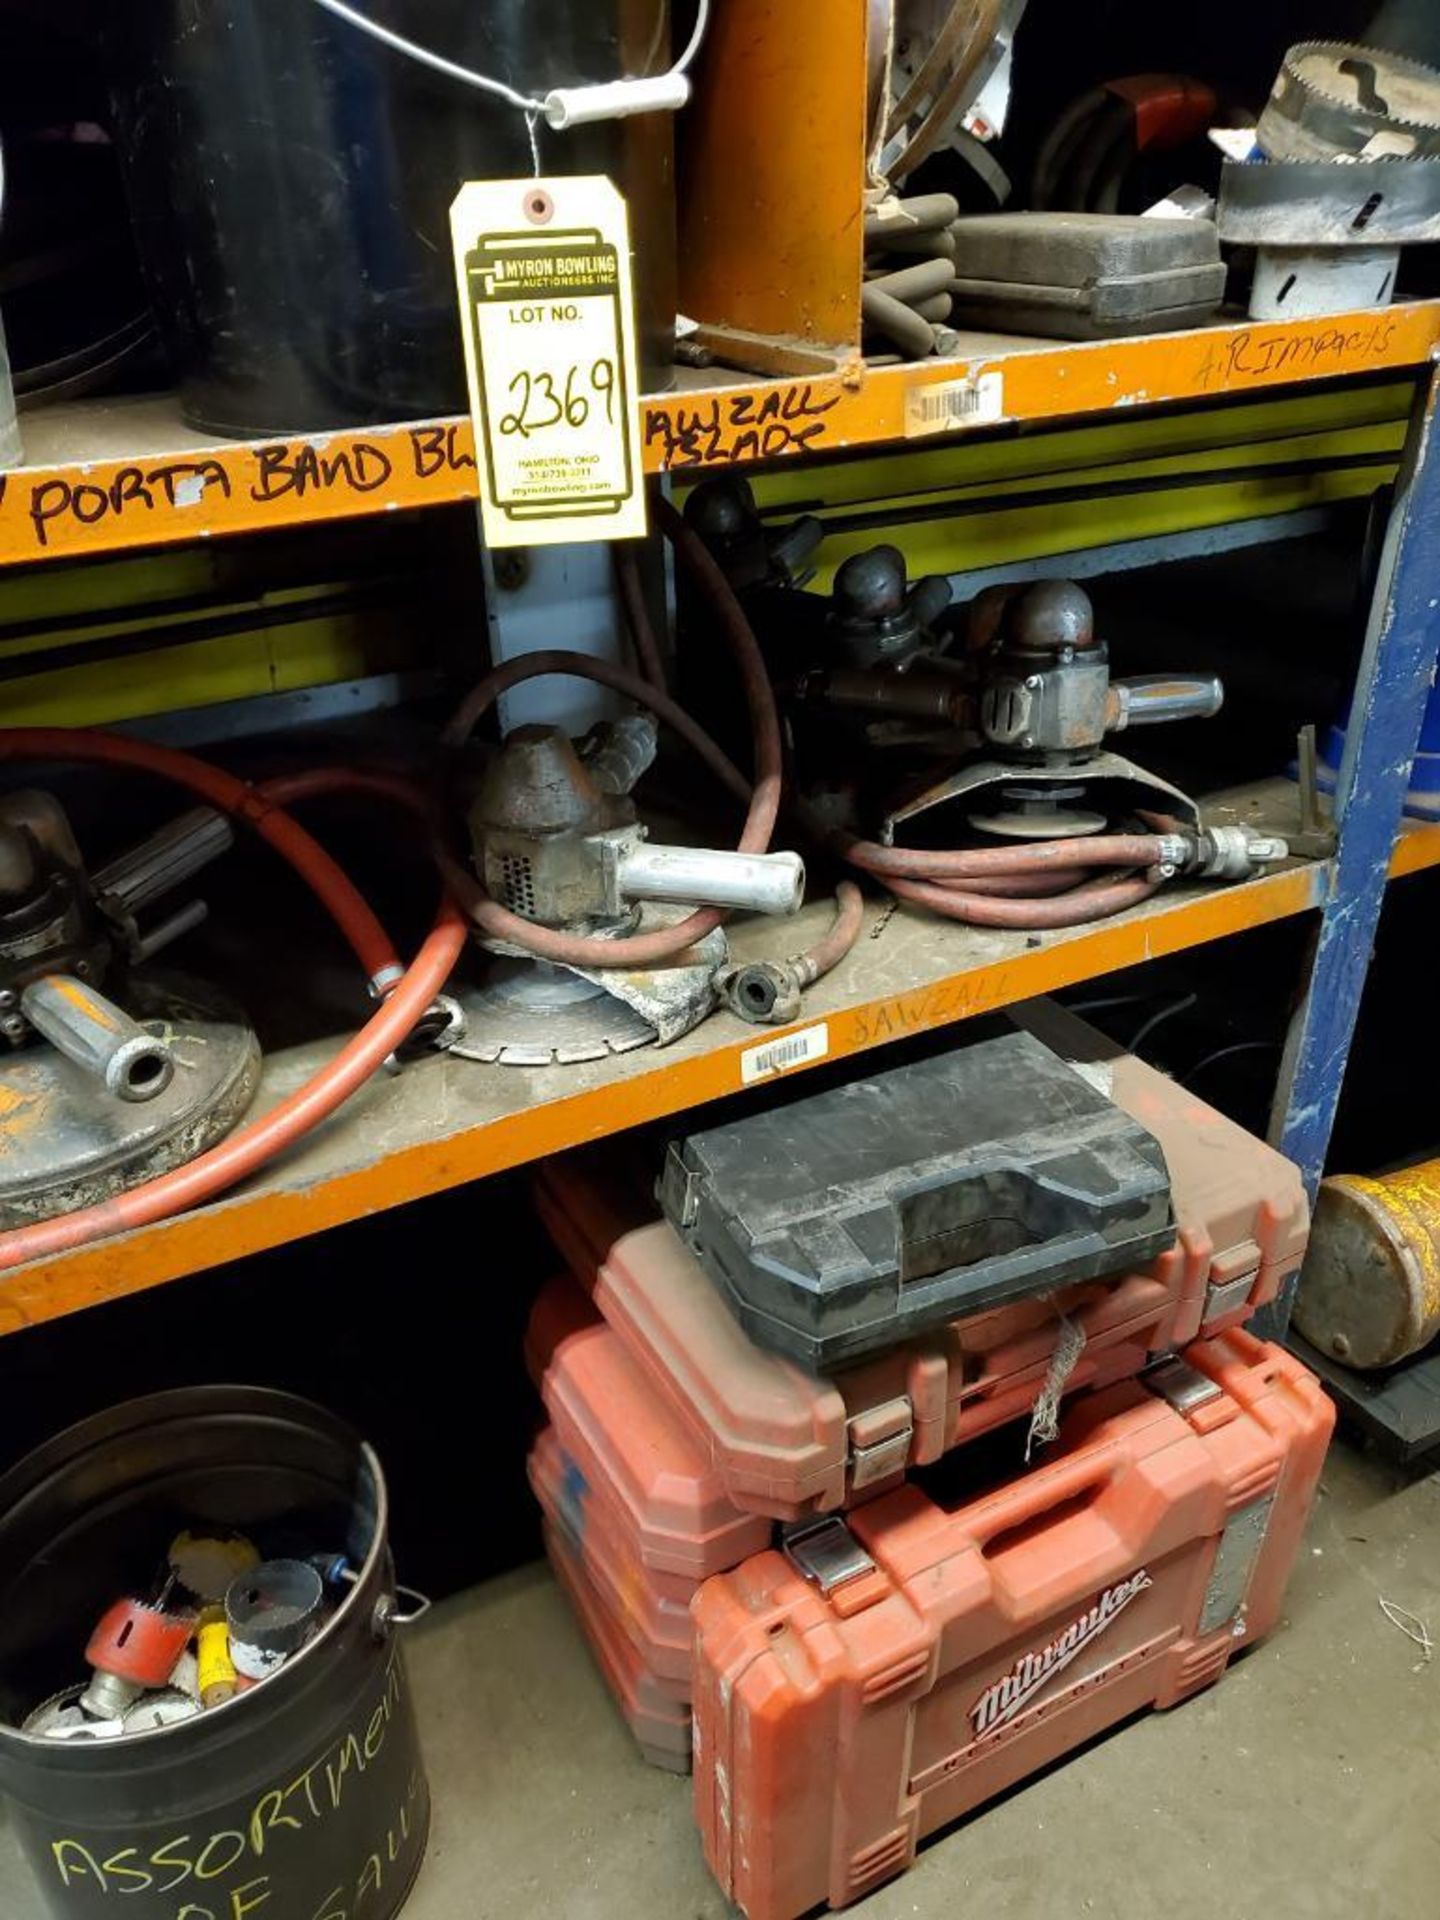 CONTENTS OF SHELVING UNIT, METABO GRINDERS, MILWAUKEE DEEP CUT BAND SAWS, PNEUMATIC METAL CUTTING SA - Image 12 of 18